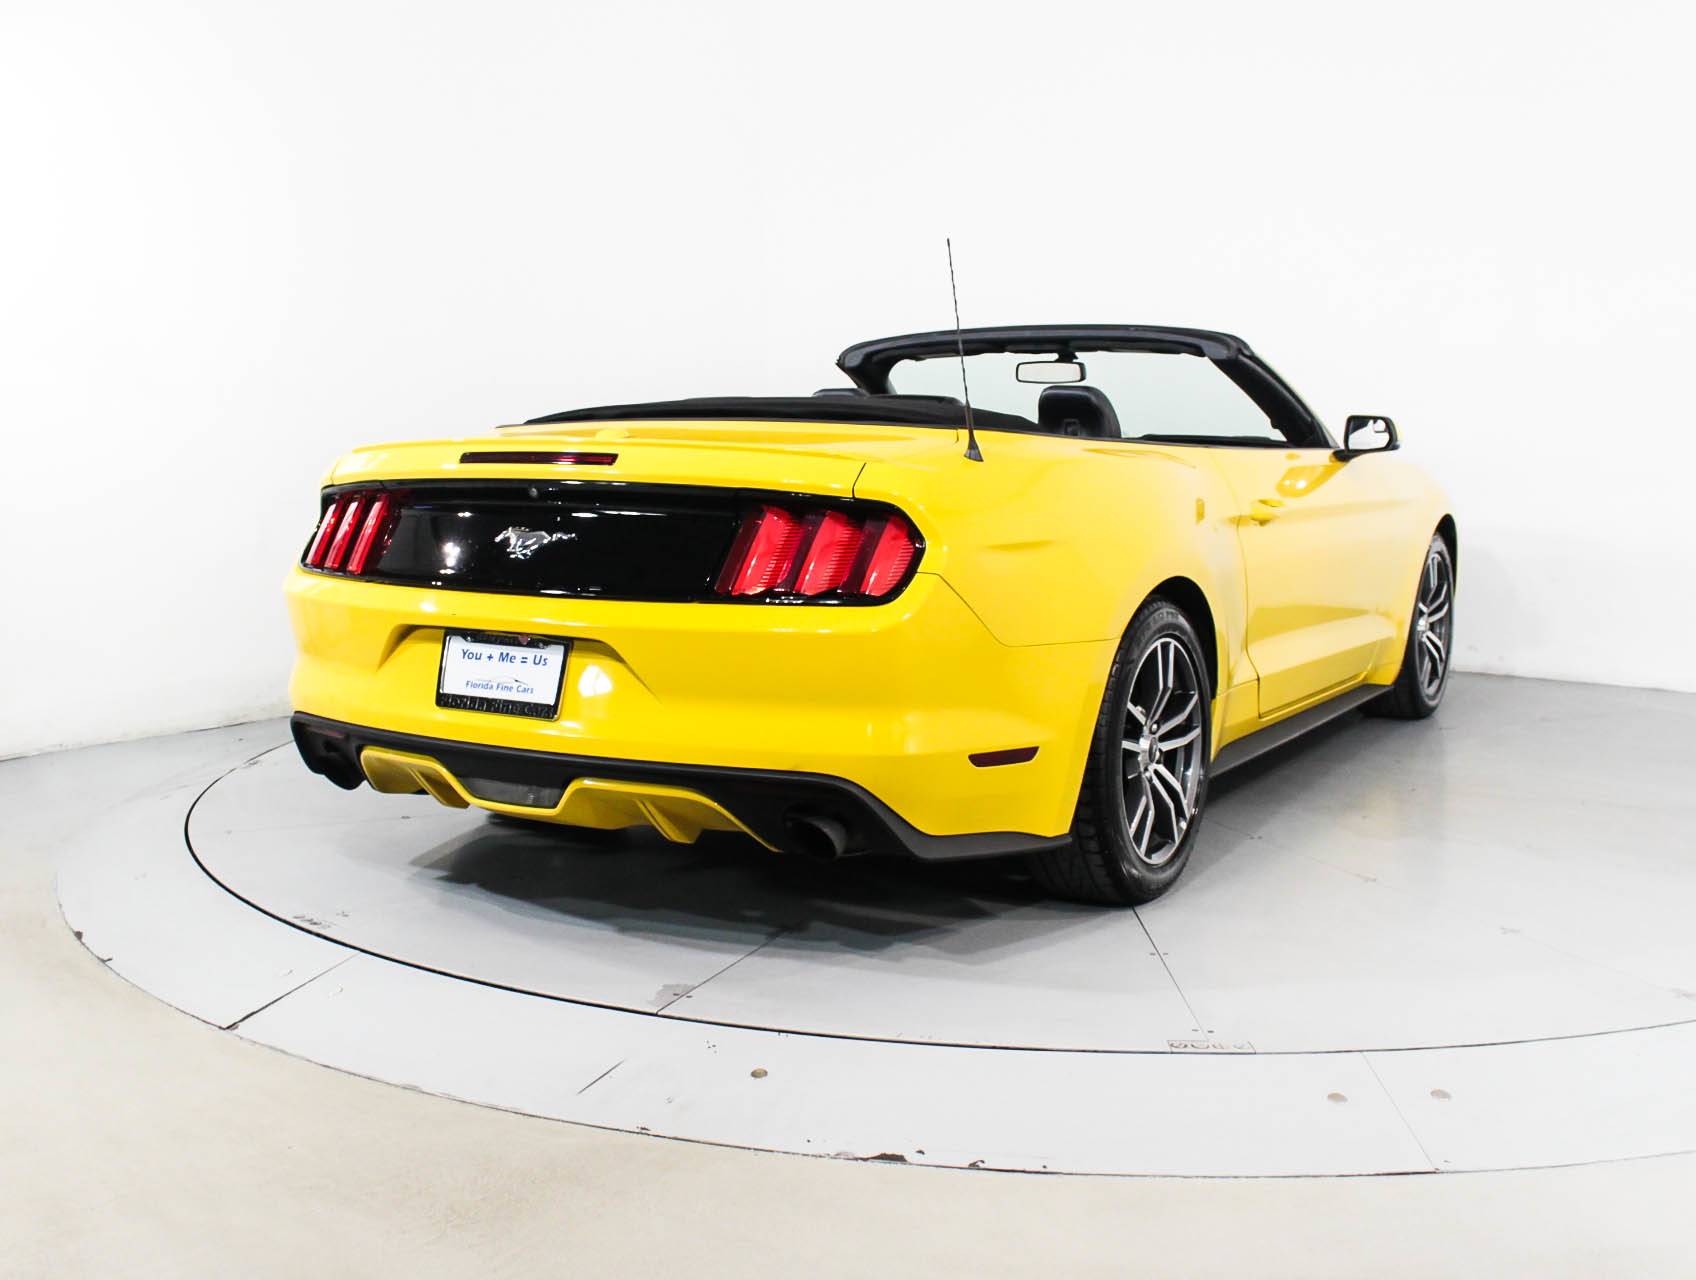 Florida Fine Cars - Used FORD MUSTANG 2016 MARGATE Ecoboost Premium